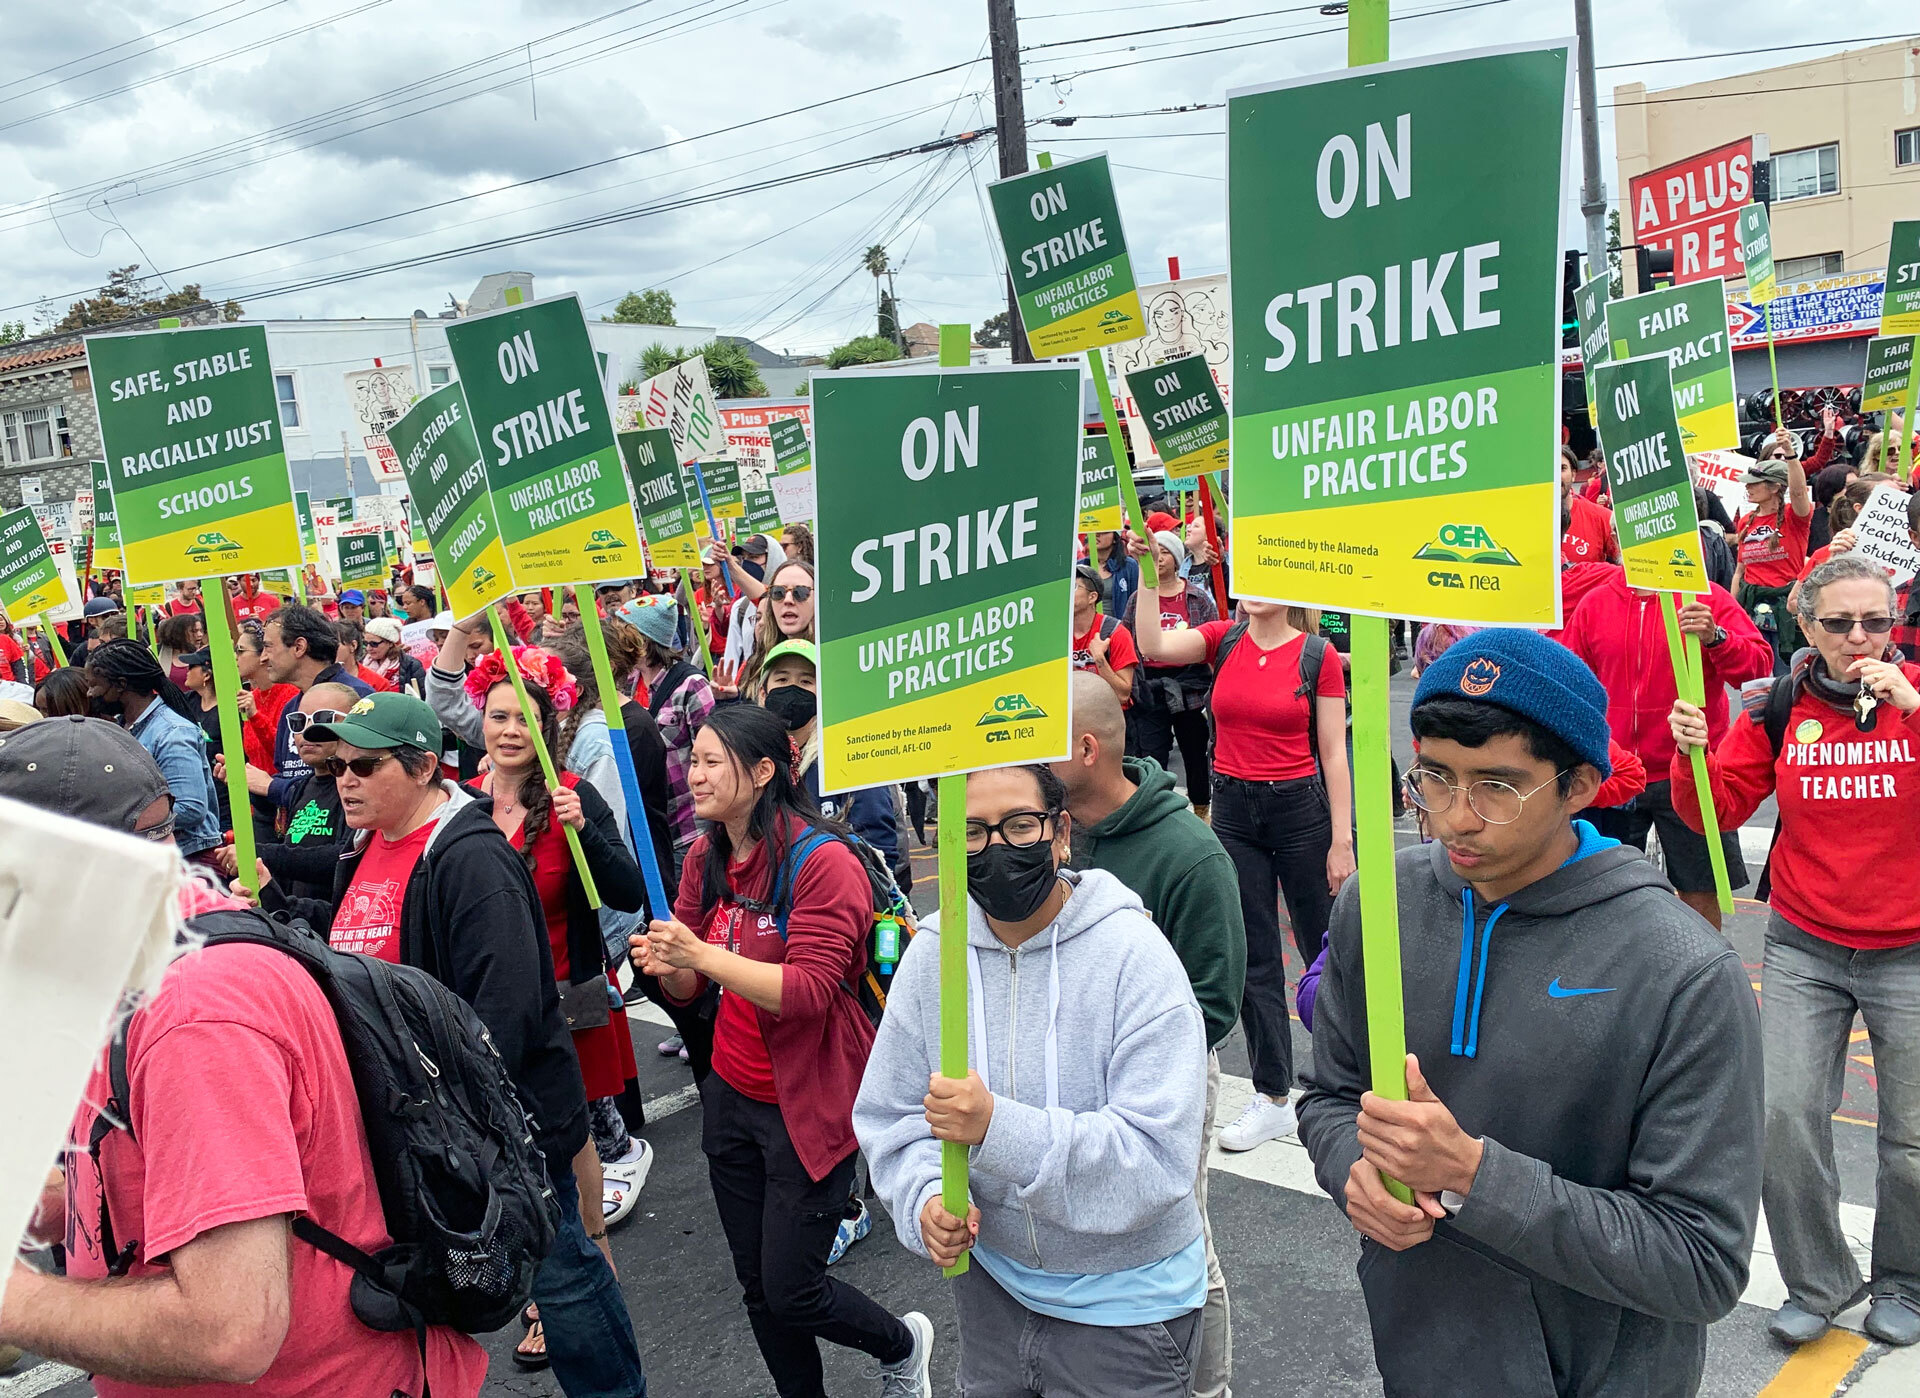 A huge crowd of protestors walk down a street in Oakland carrying green and yellow picket signs that read "On Strike Unfair Labor Practices." Many participants wear red and one woman has a hooded sweatshirt that reads "phenomenal teacher." Another sign reads "Safe, Stable and Racially Just Schools"